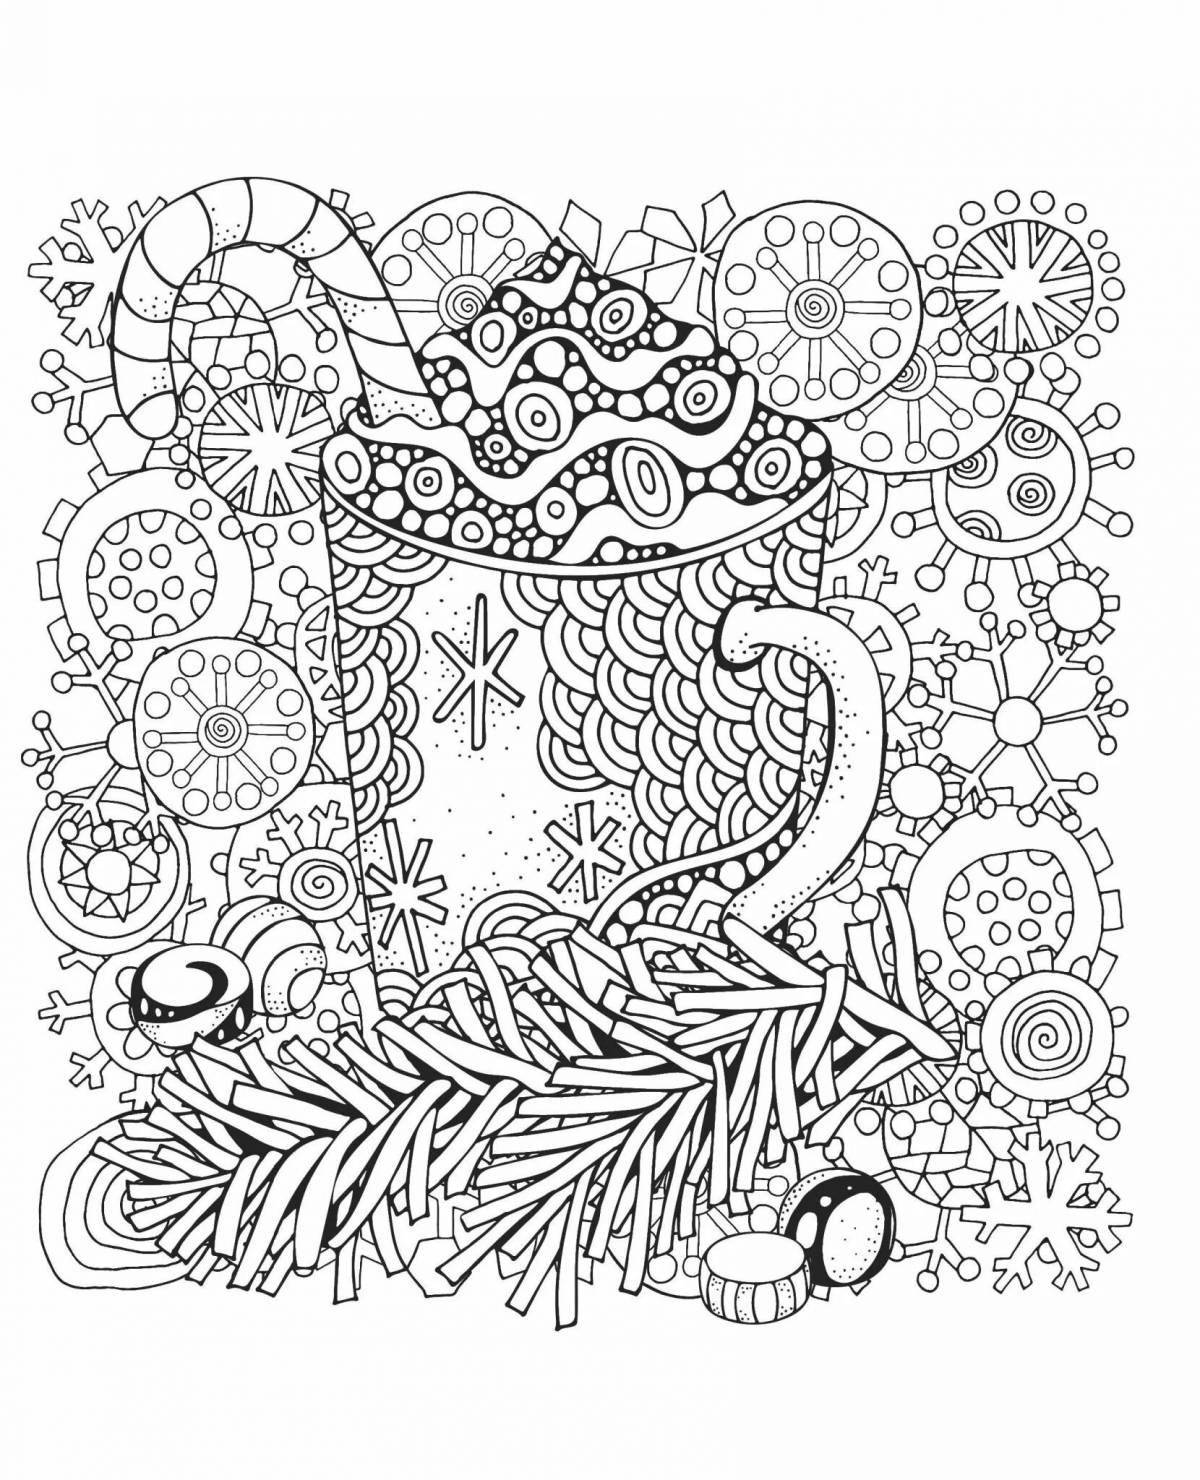 Amazing antistress winter coloring book